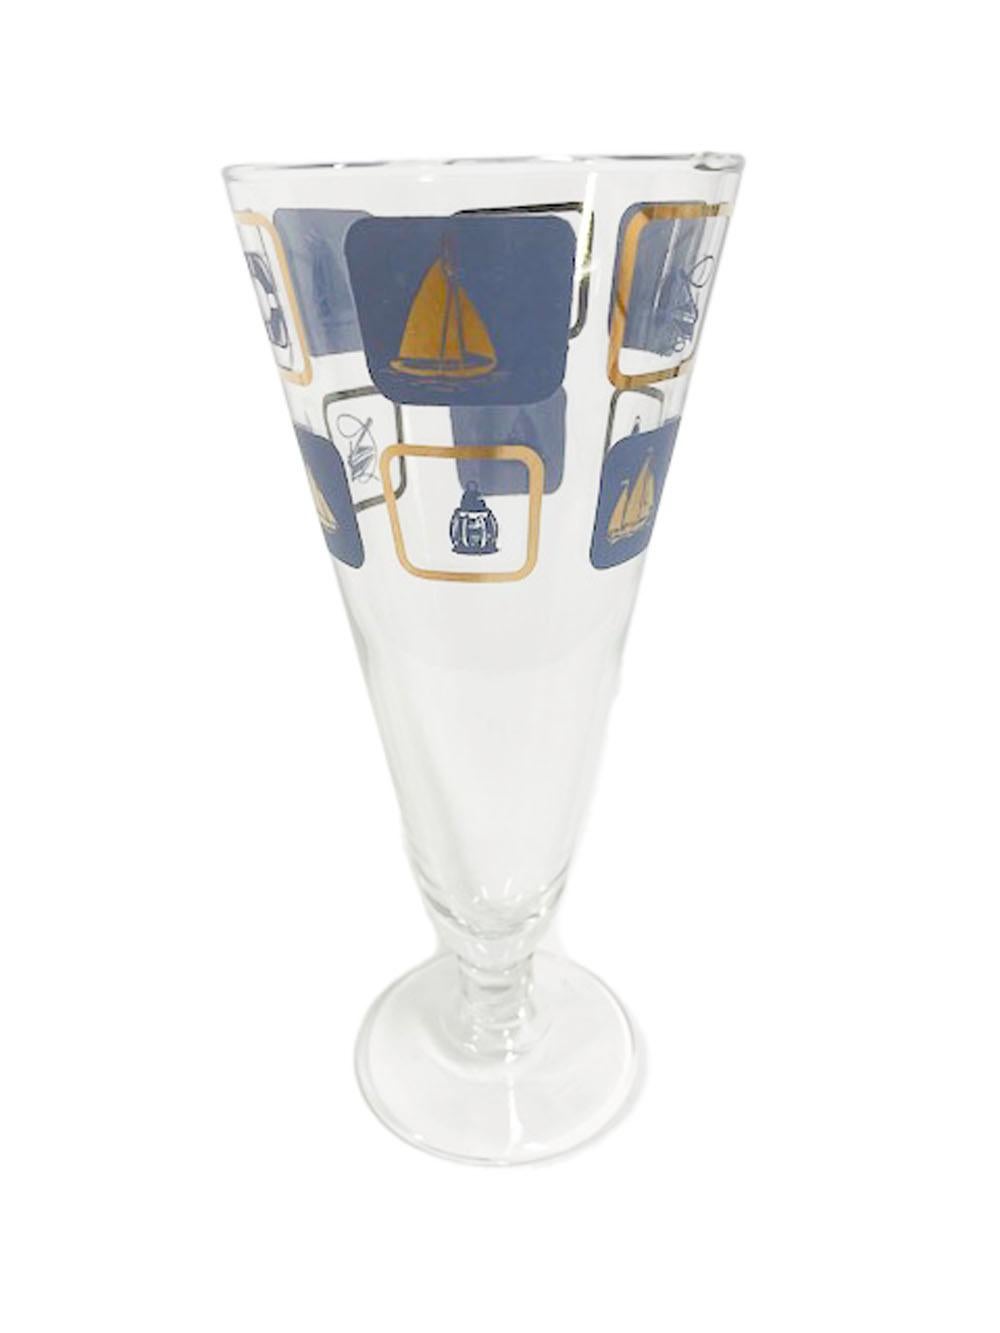 20th Century Vintage Nautical Themed Pilsner Glasses Decorated in Blue Enamel and 22k Gold For Sale